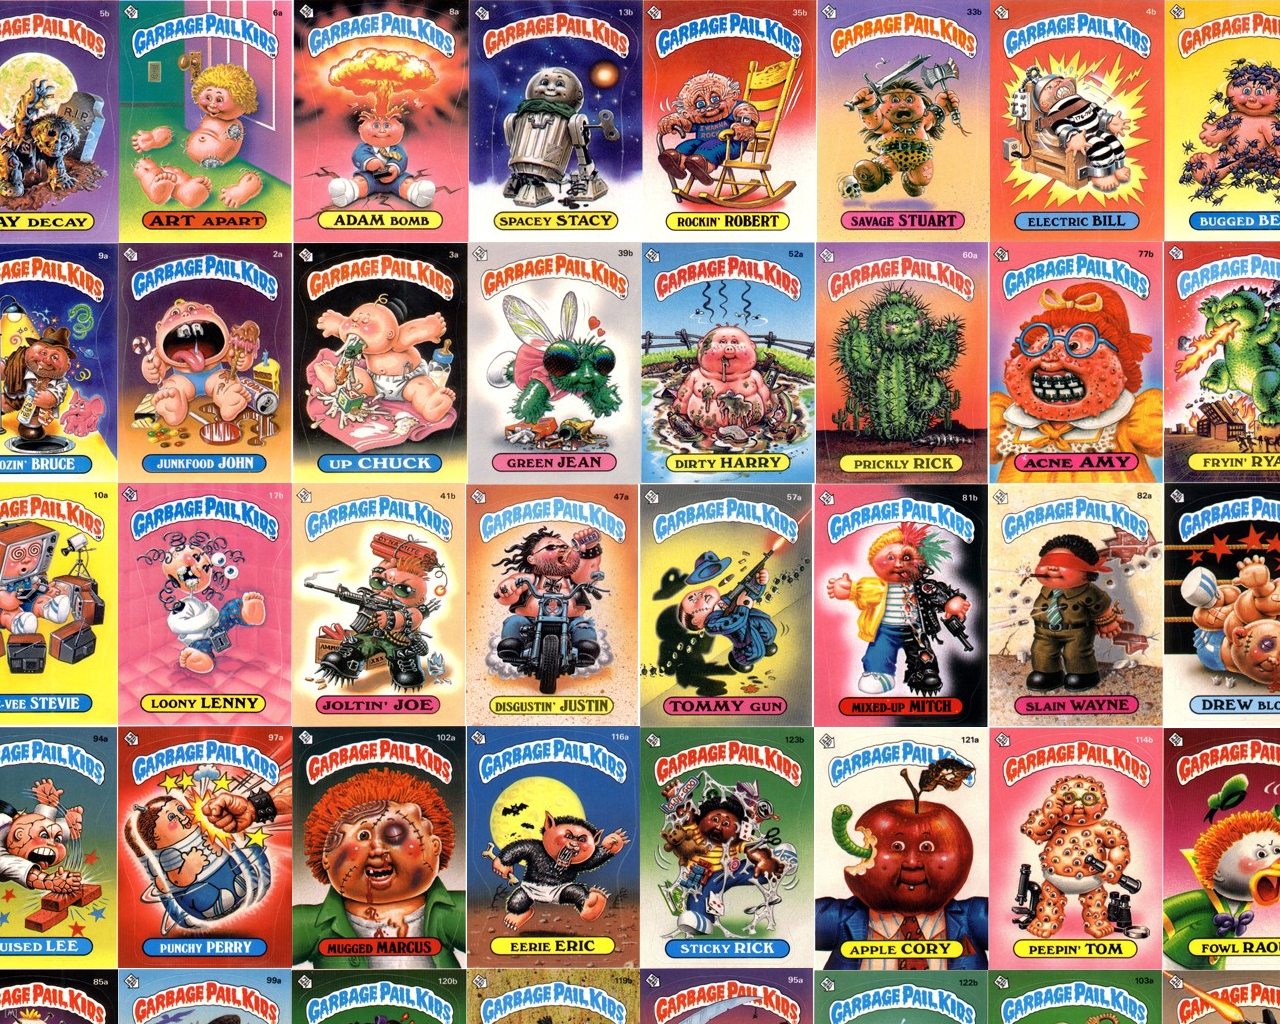 Garbage Pail Kids,1985 saw the advent of one of the most parent-hated toys the 80s ever saw. These toys were a vicious mockery of Cabbage Patch Kids dolls.